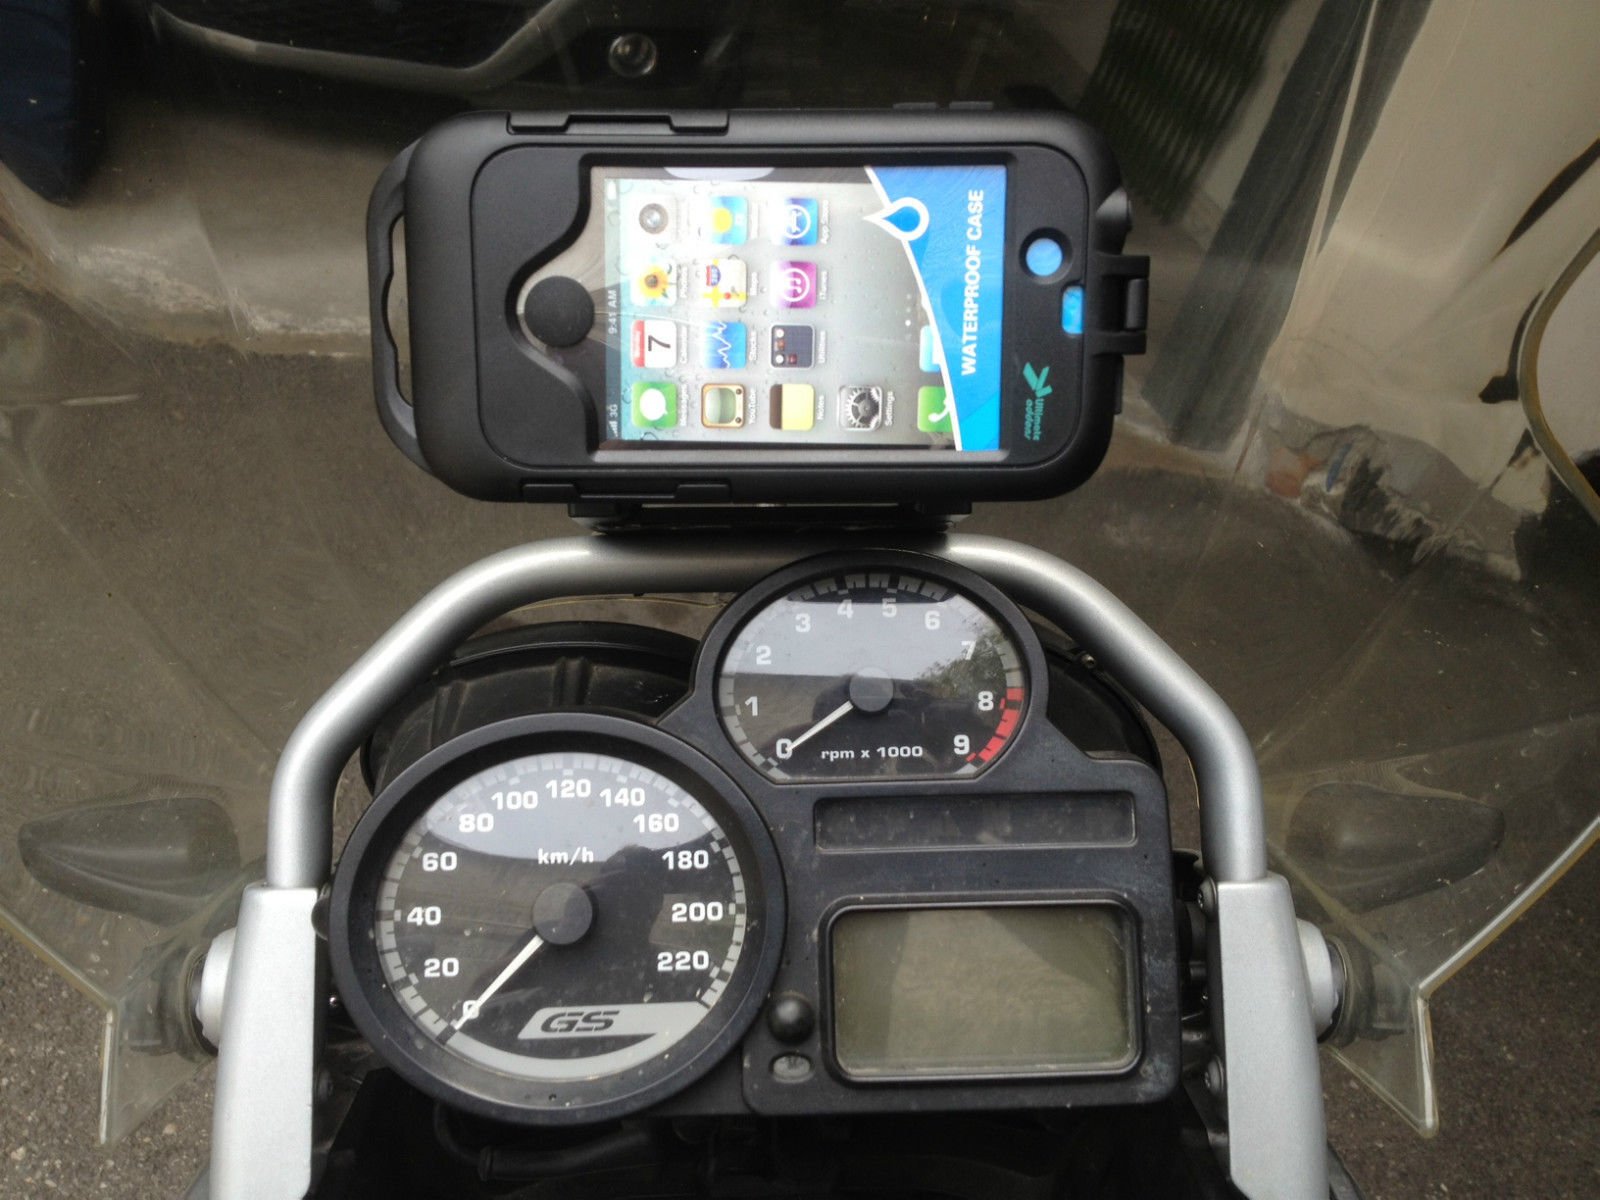 BMW R 1200 GS GPS/Smart phone holder/support 2004-2007